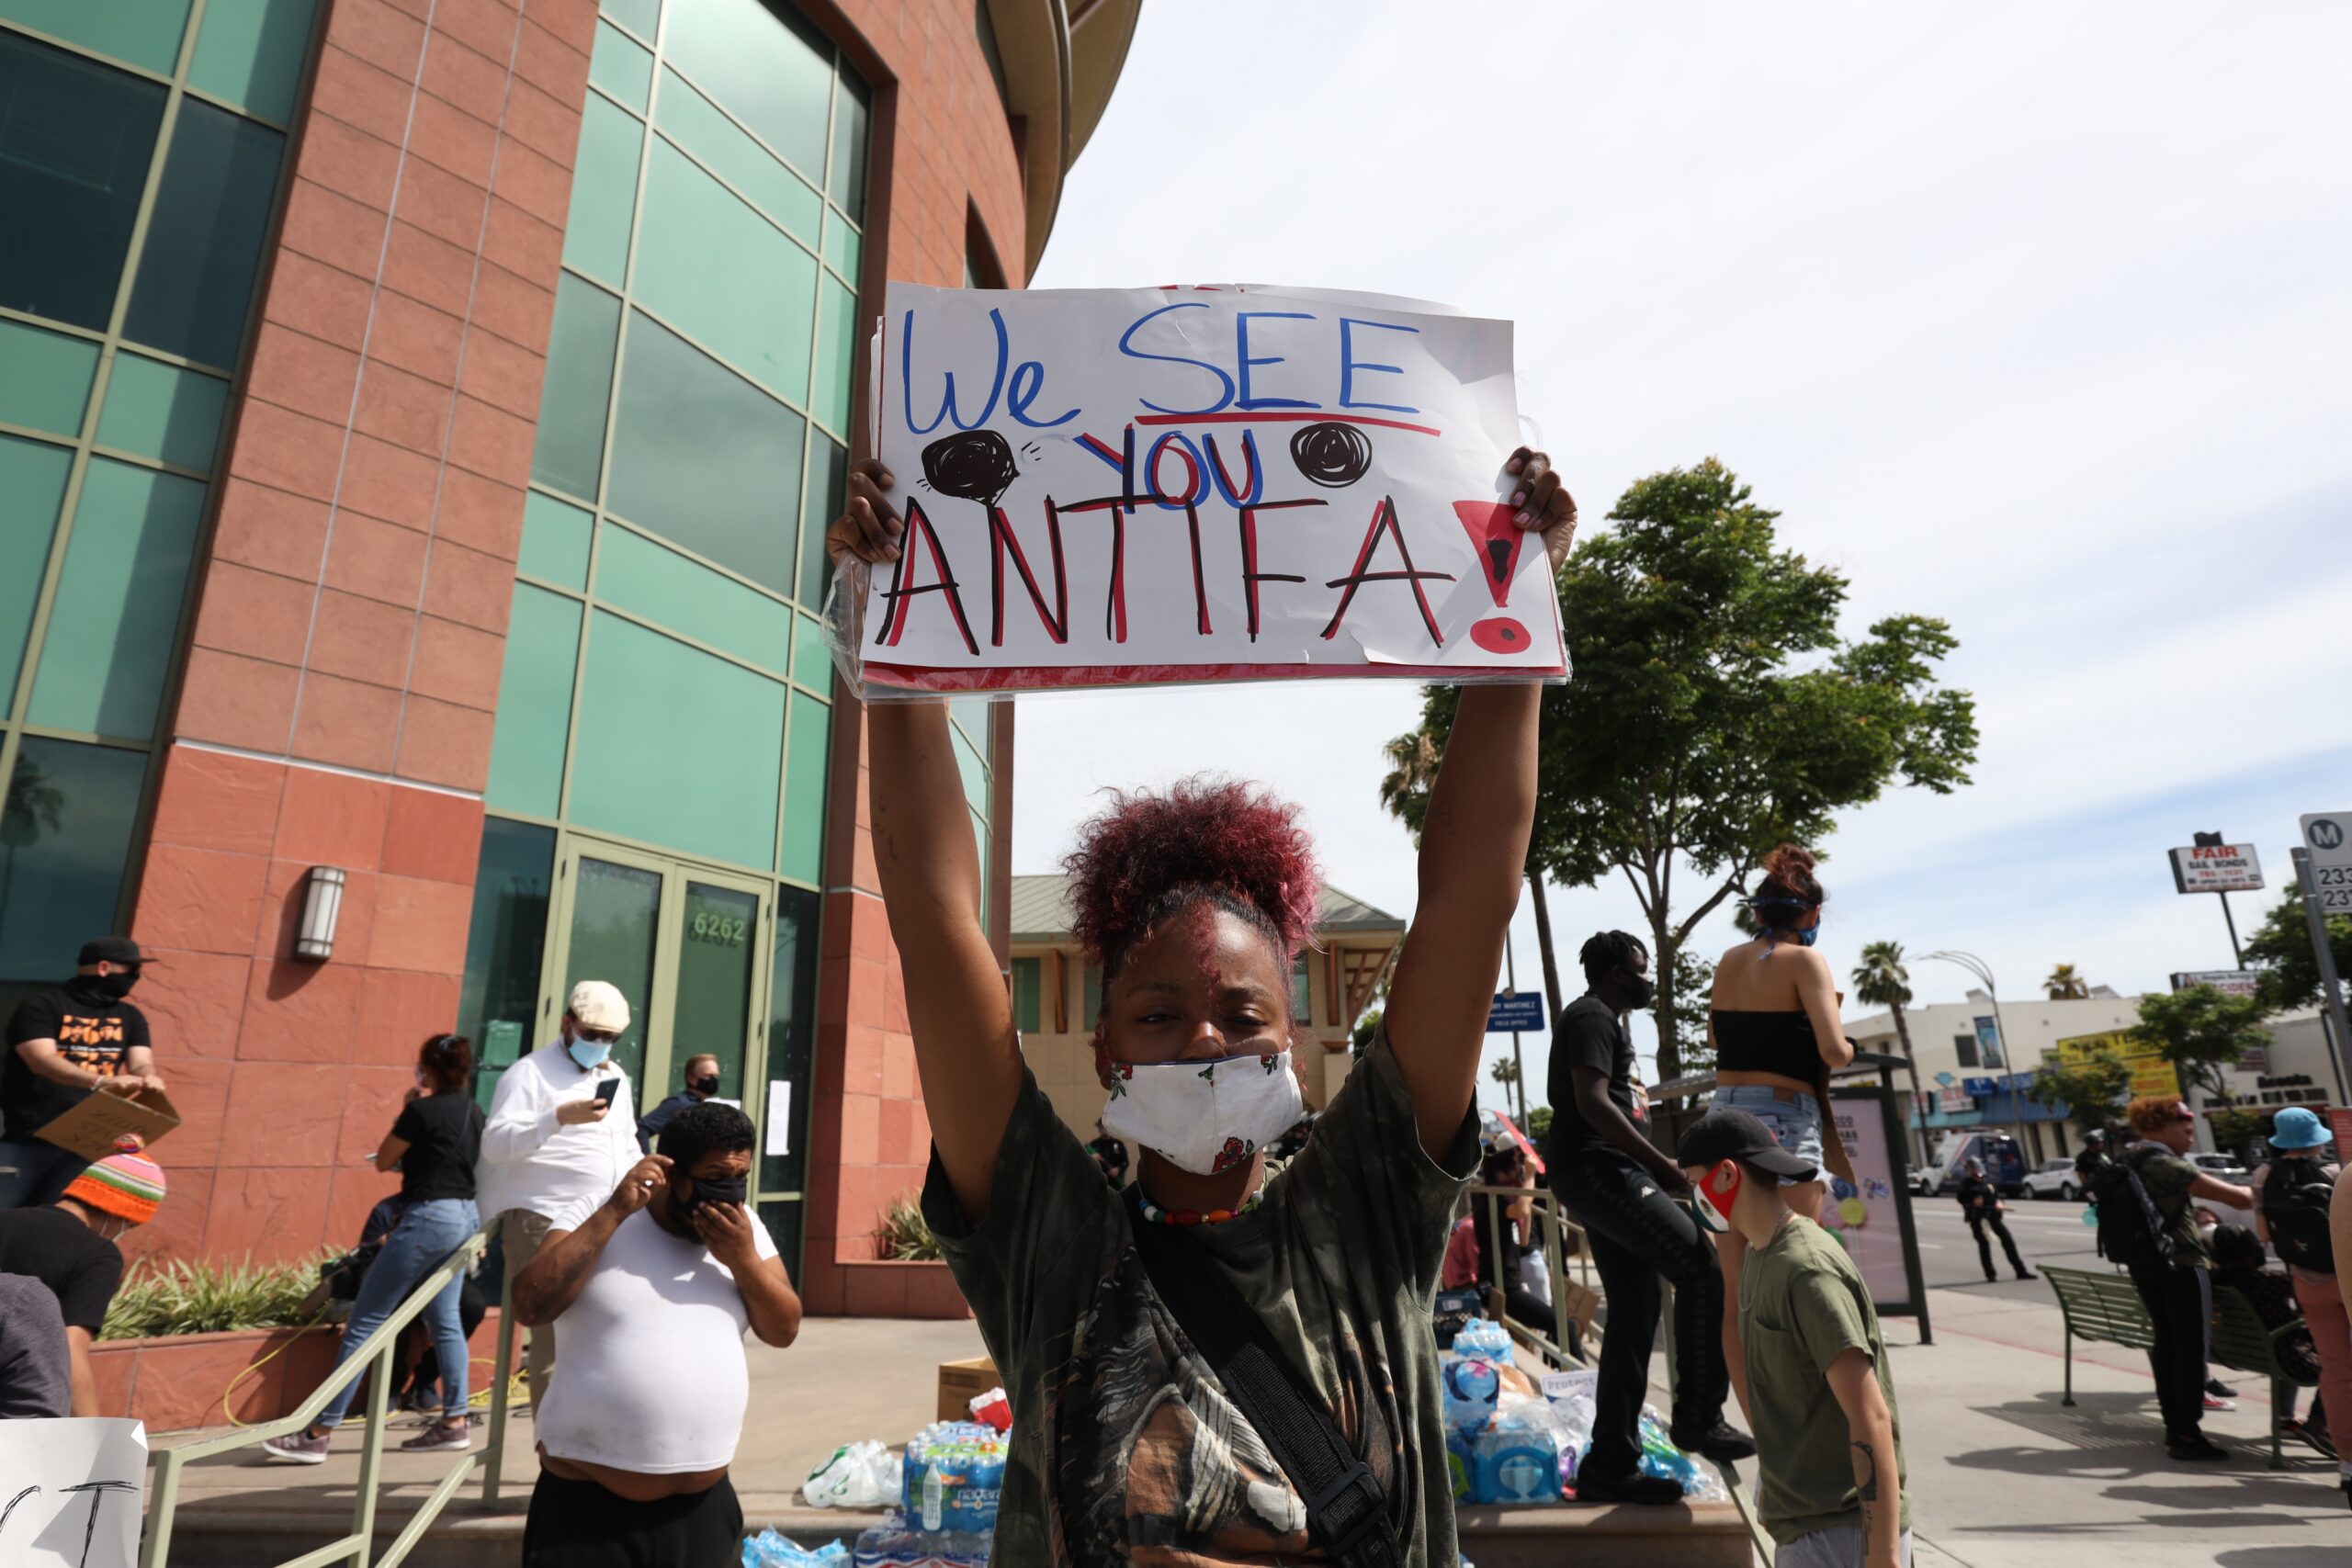 A woman holds a sign addressing ANTIFA at a protest in Los Angeles